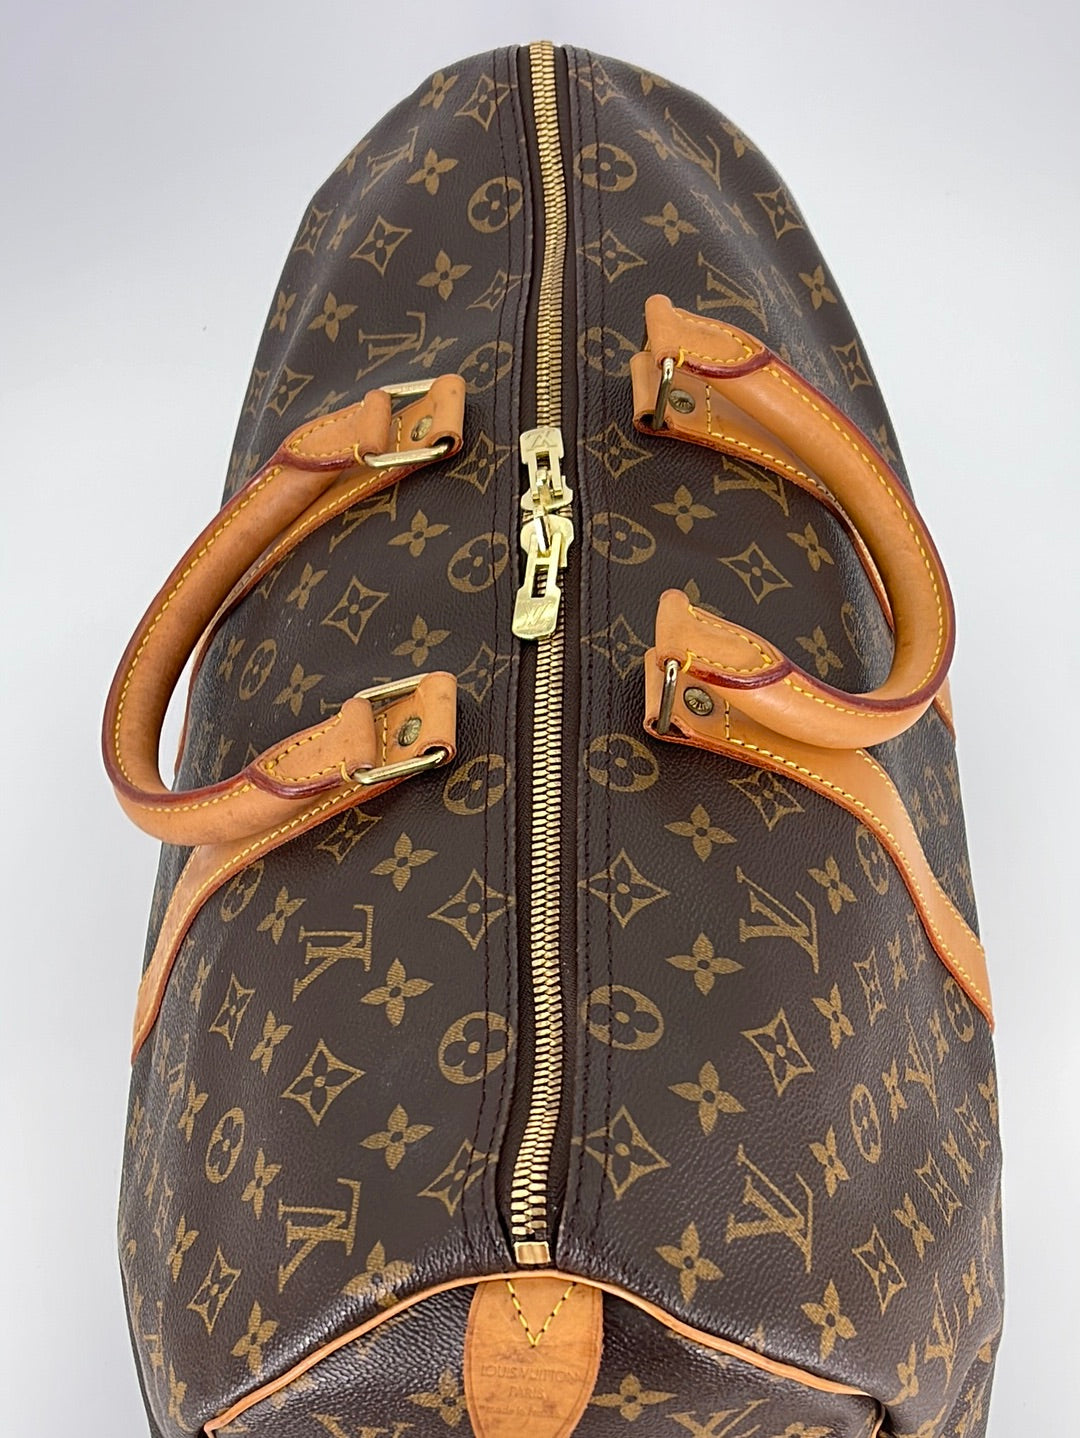 Louis Vuitton Keepall 45 M41444 – Timeless Vintage Company